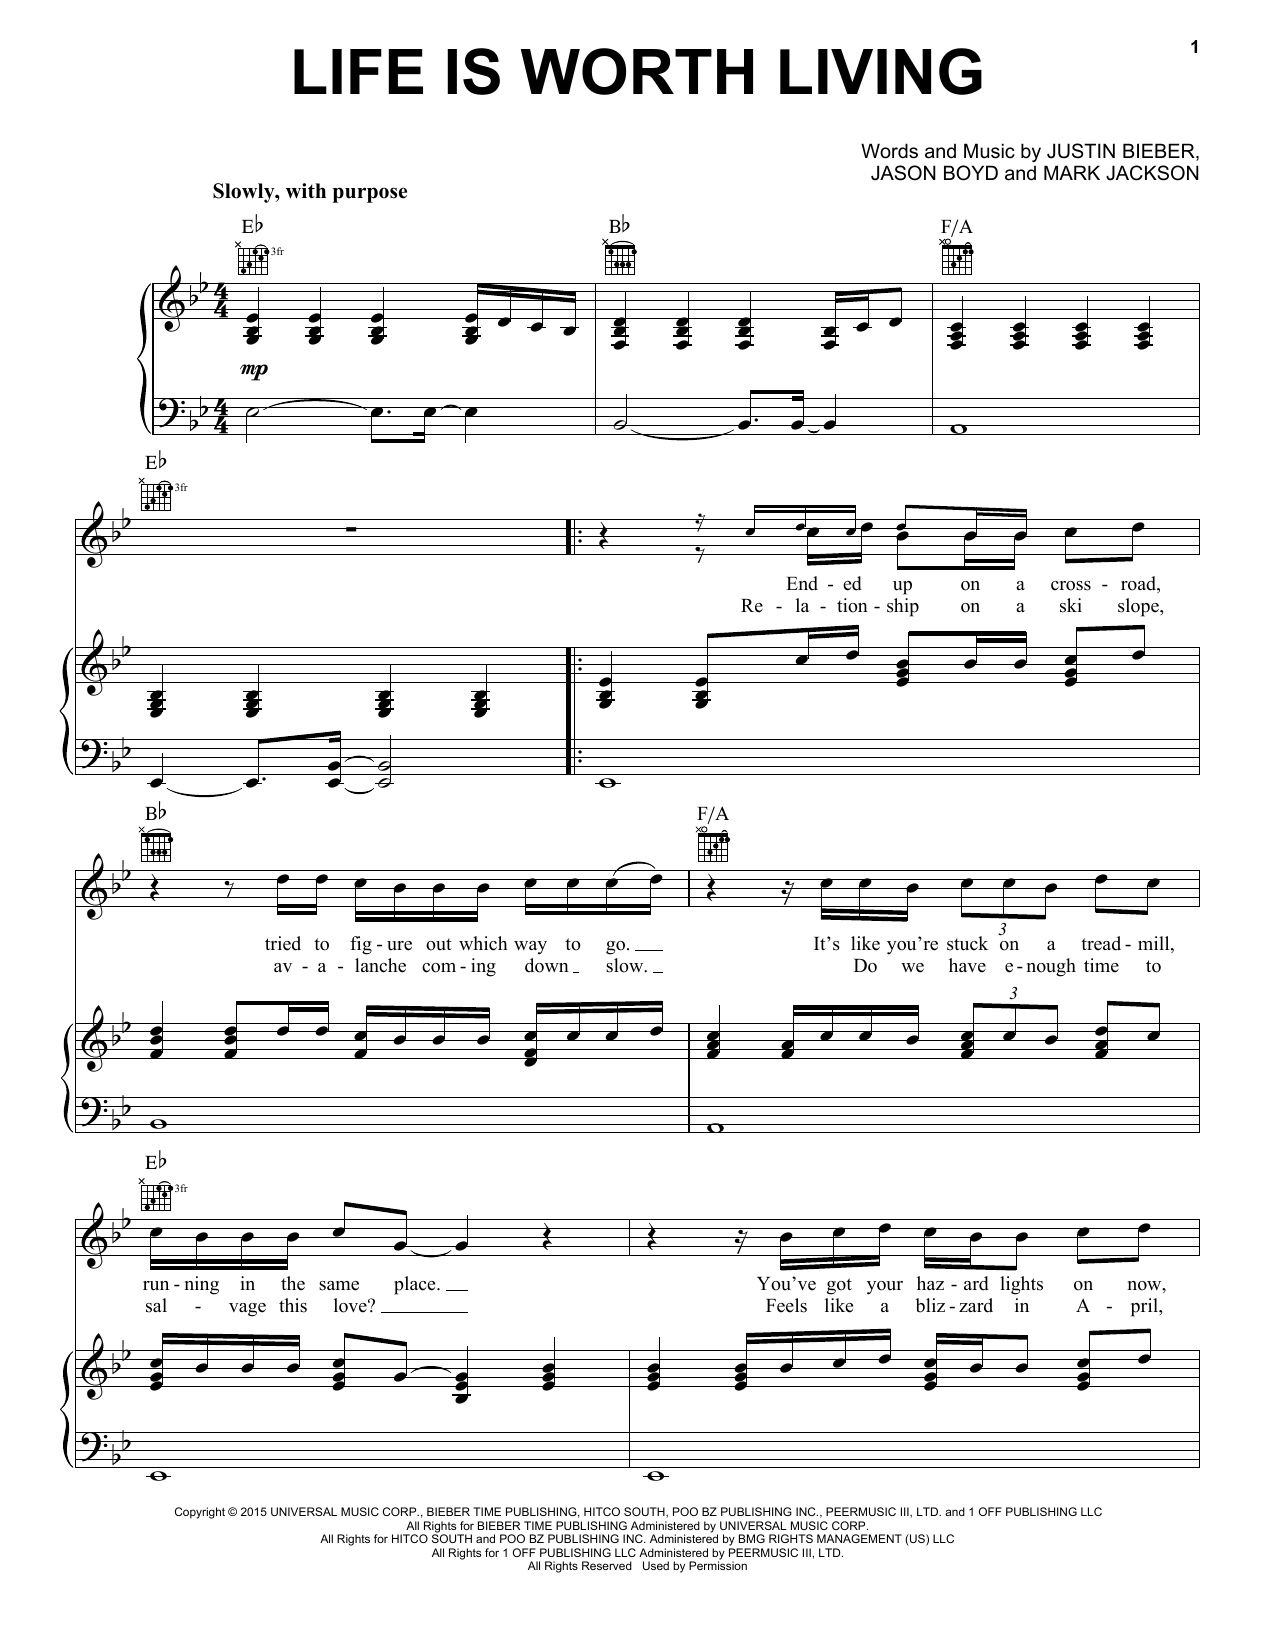 Download Justin Bieber Life Is Worth Living Sheet Music